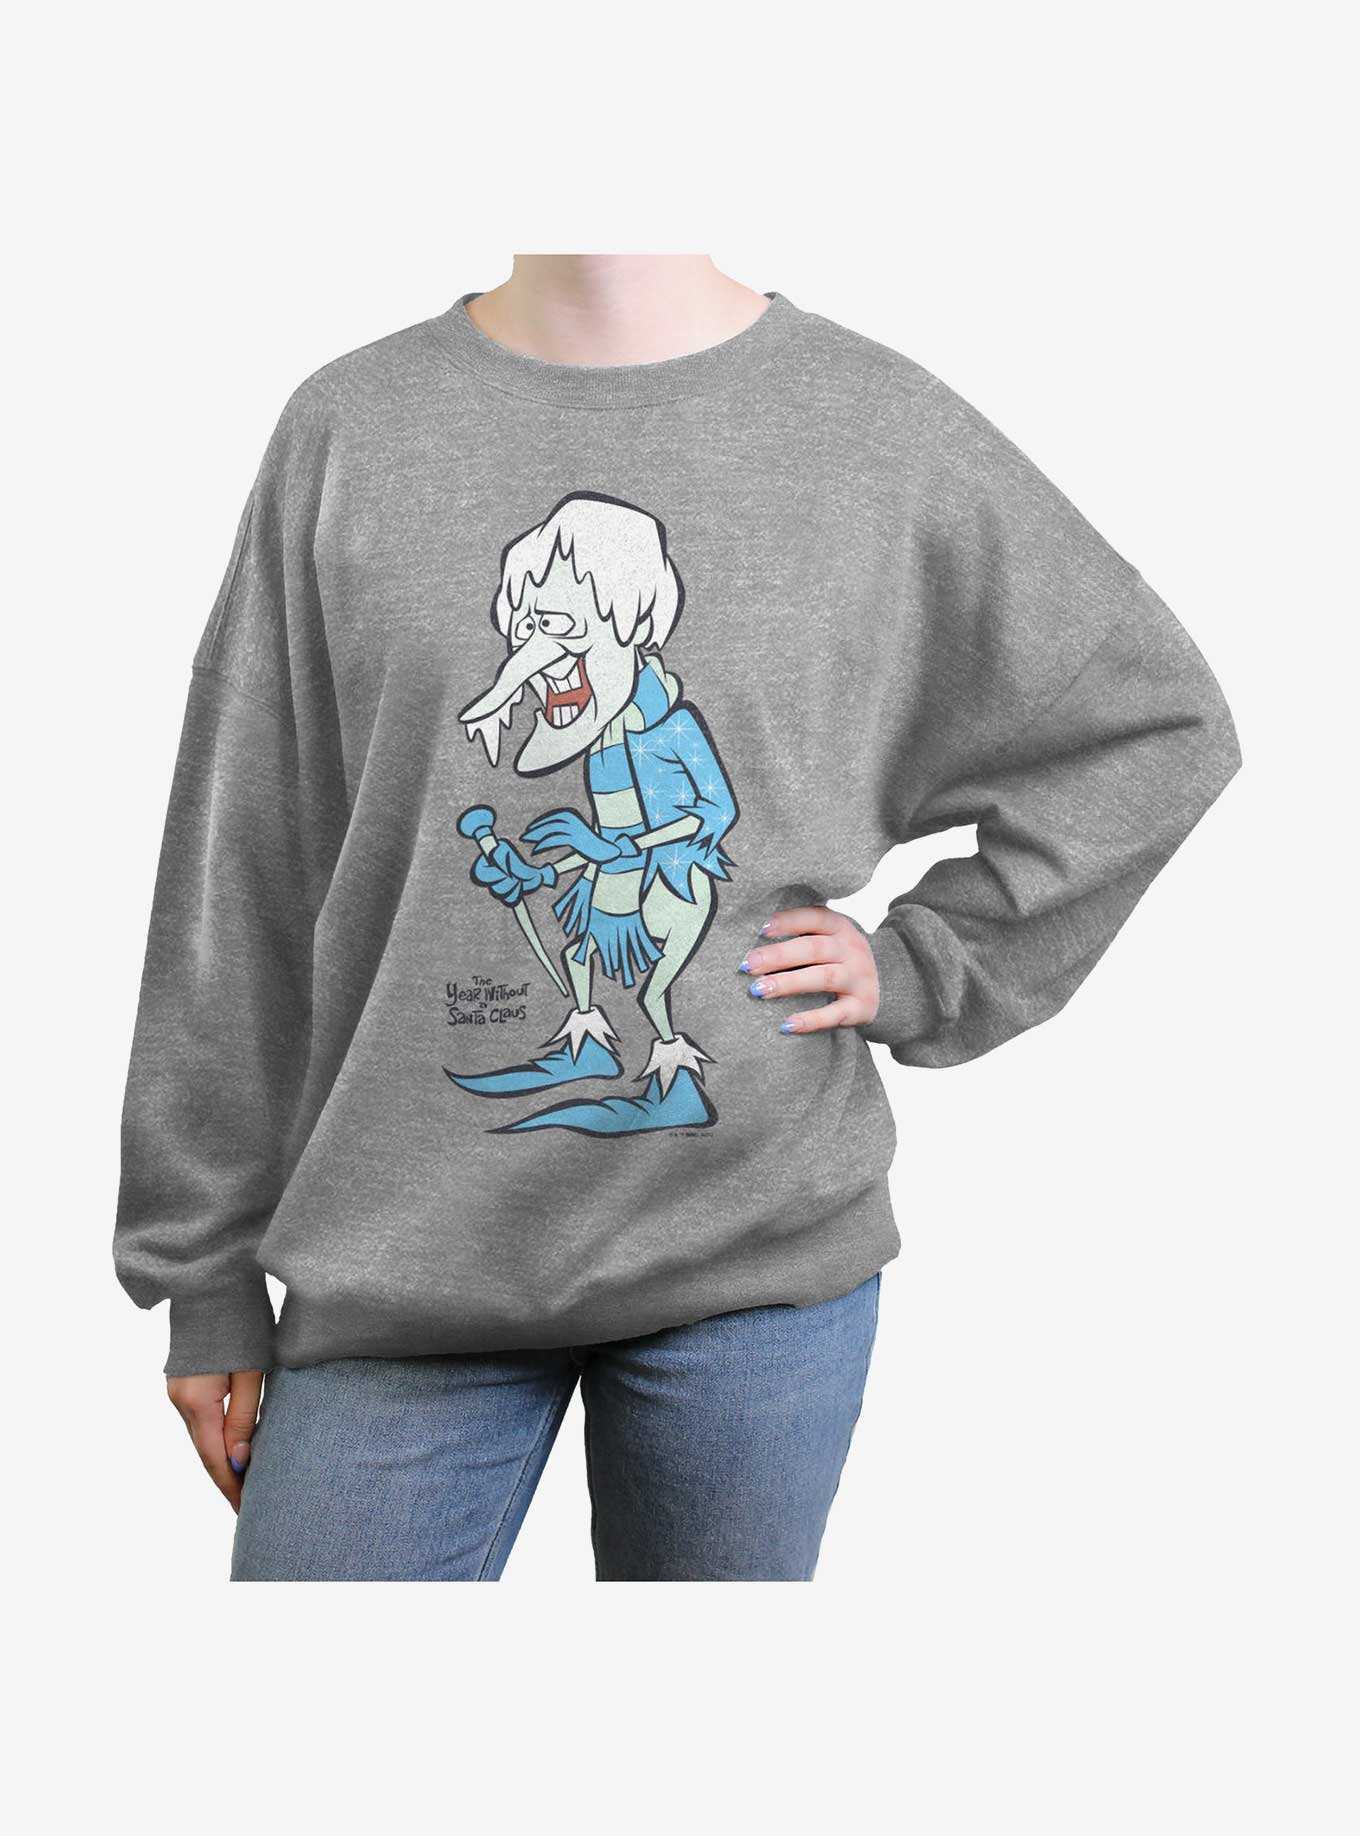 The Year Without a Santa Claus Snow Miser Girls Oversized Sweatshirt, , hi-res